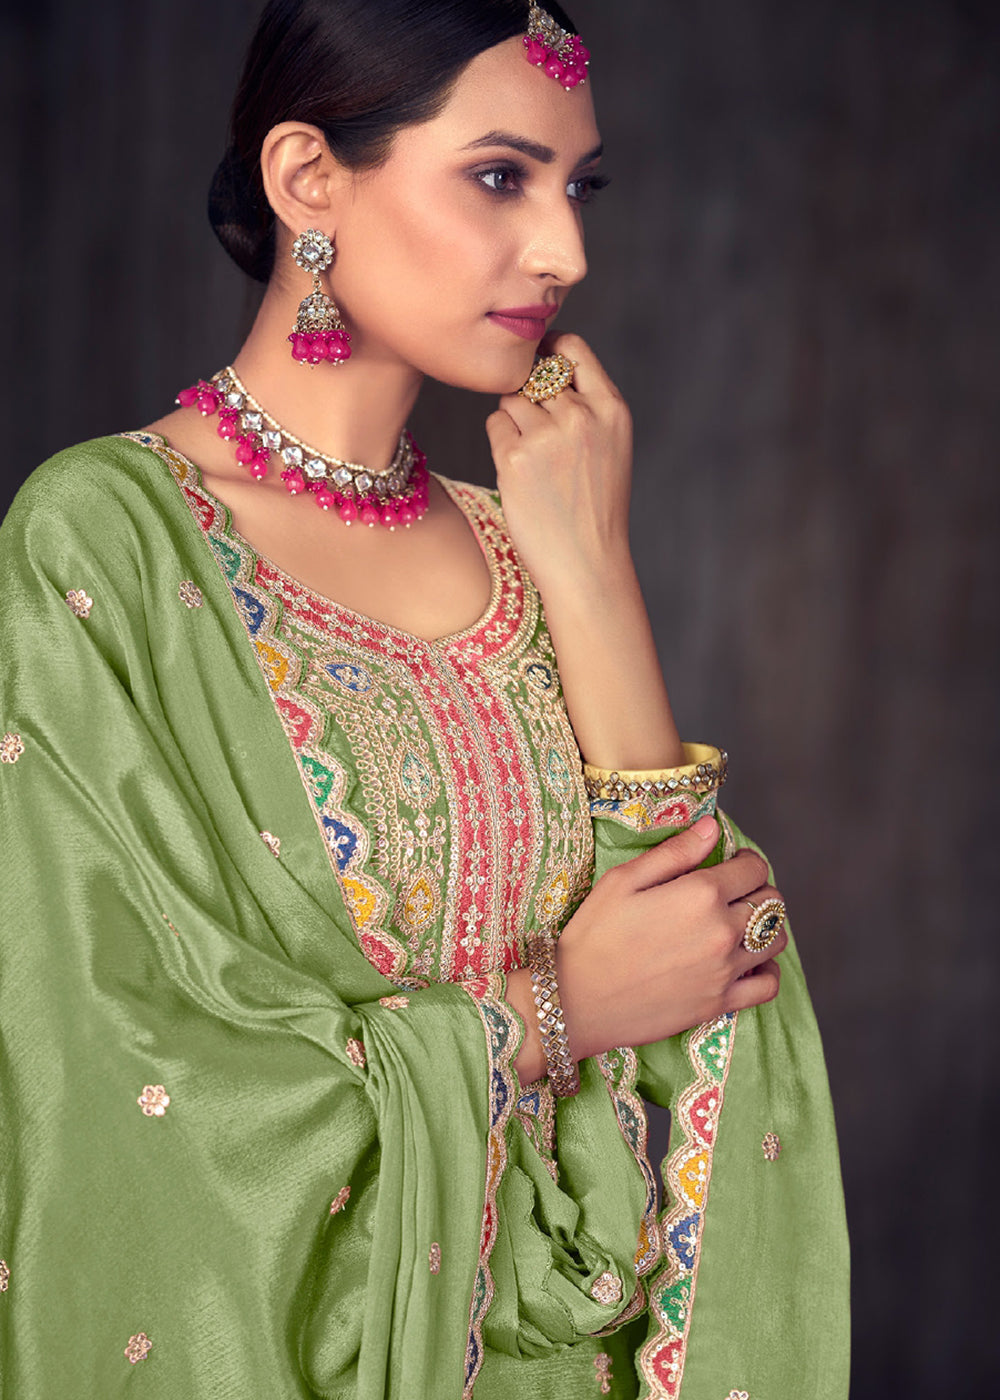 Buy Now Sage Green Heavy Chinnon Embroidered Lehenga Kurti Suit Online in USA, UK, Canada, Germany, Australia & Worldwide at Empress Clothing.